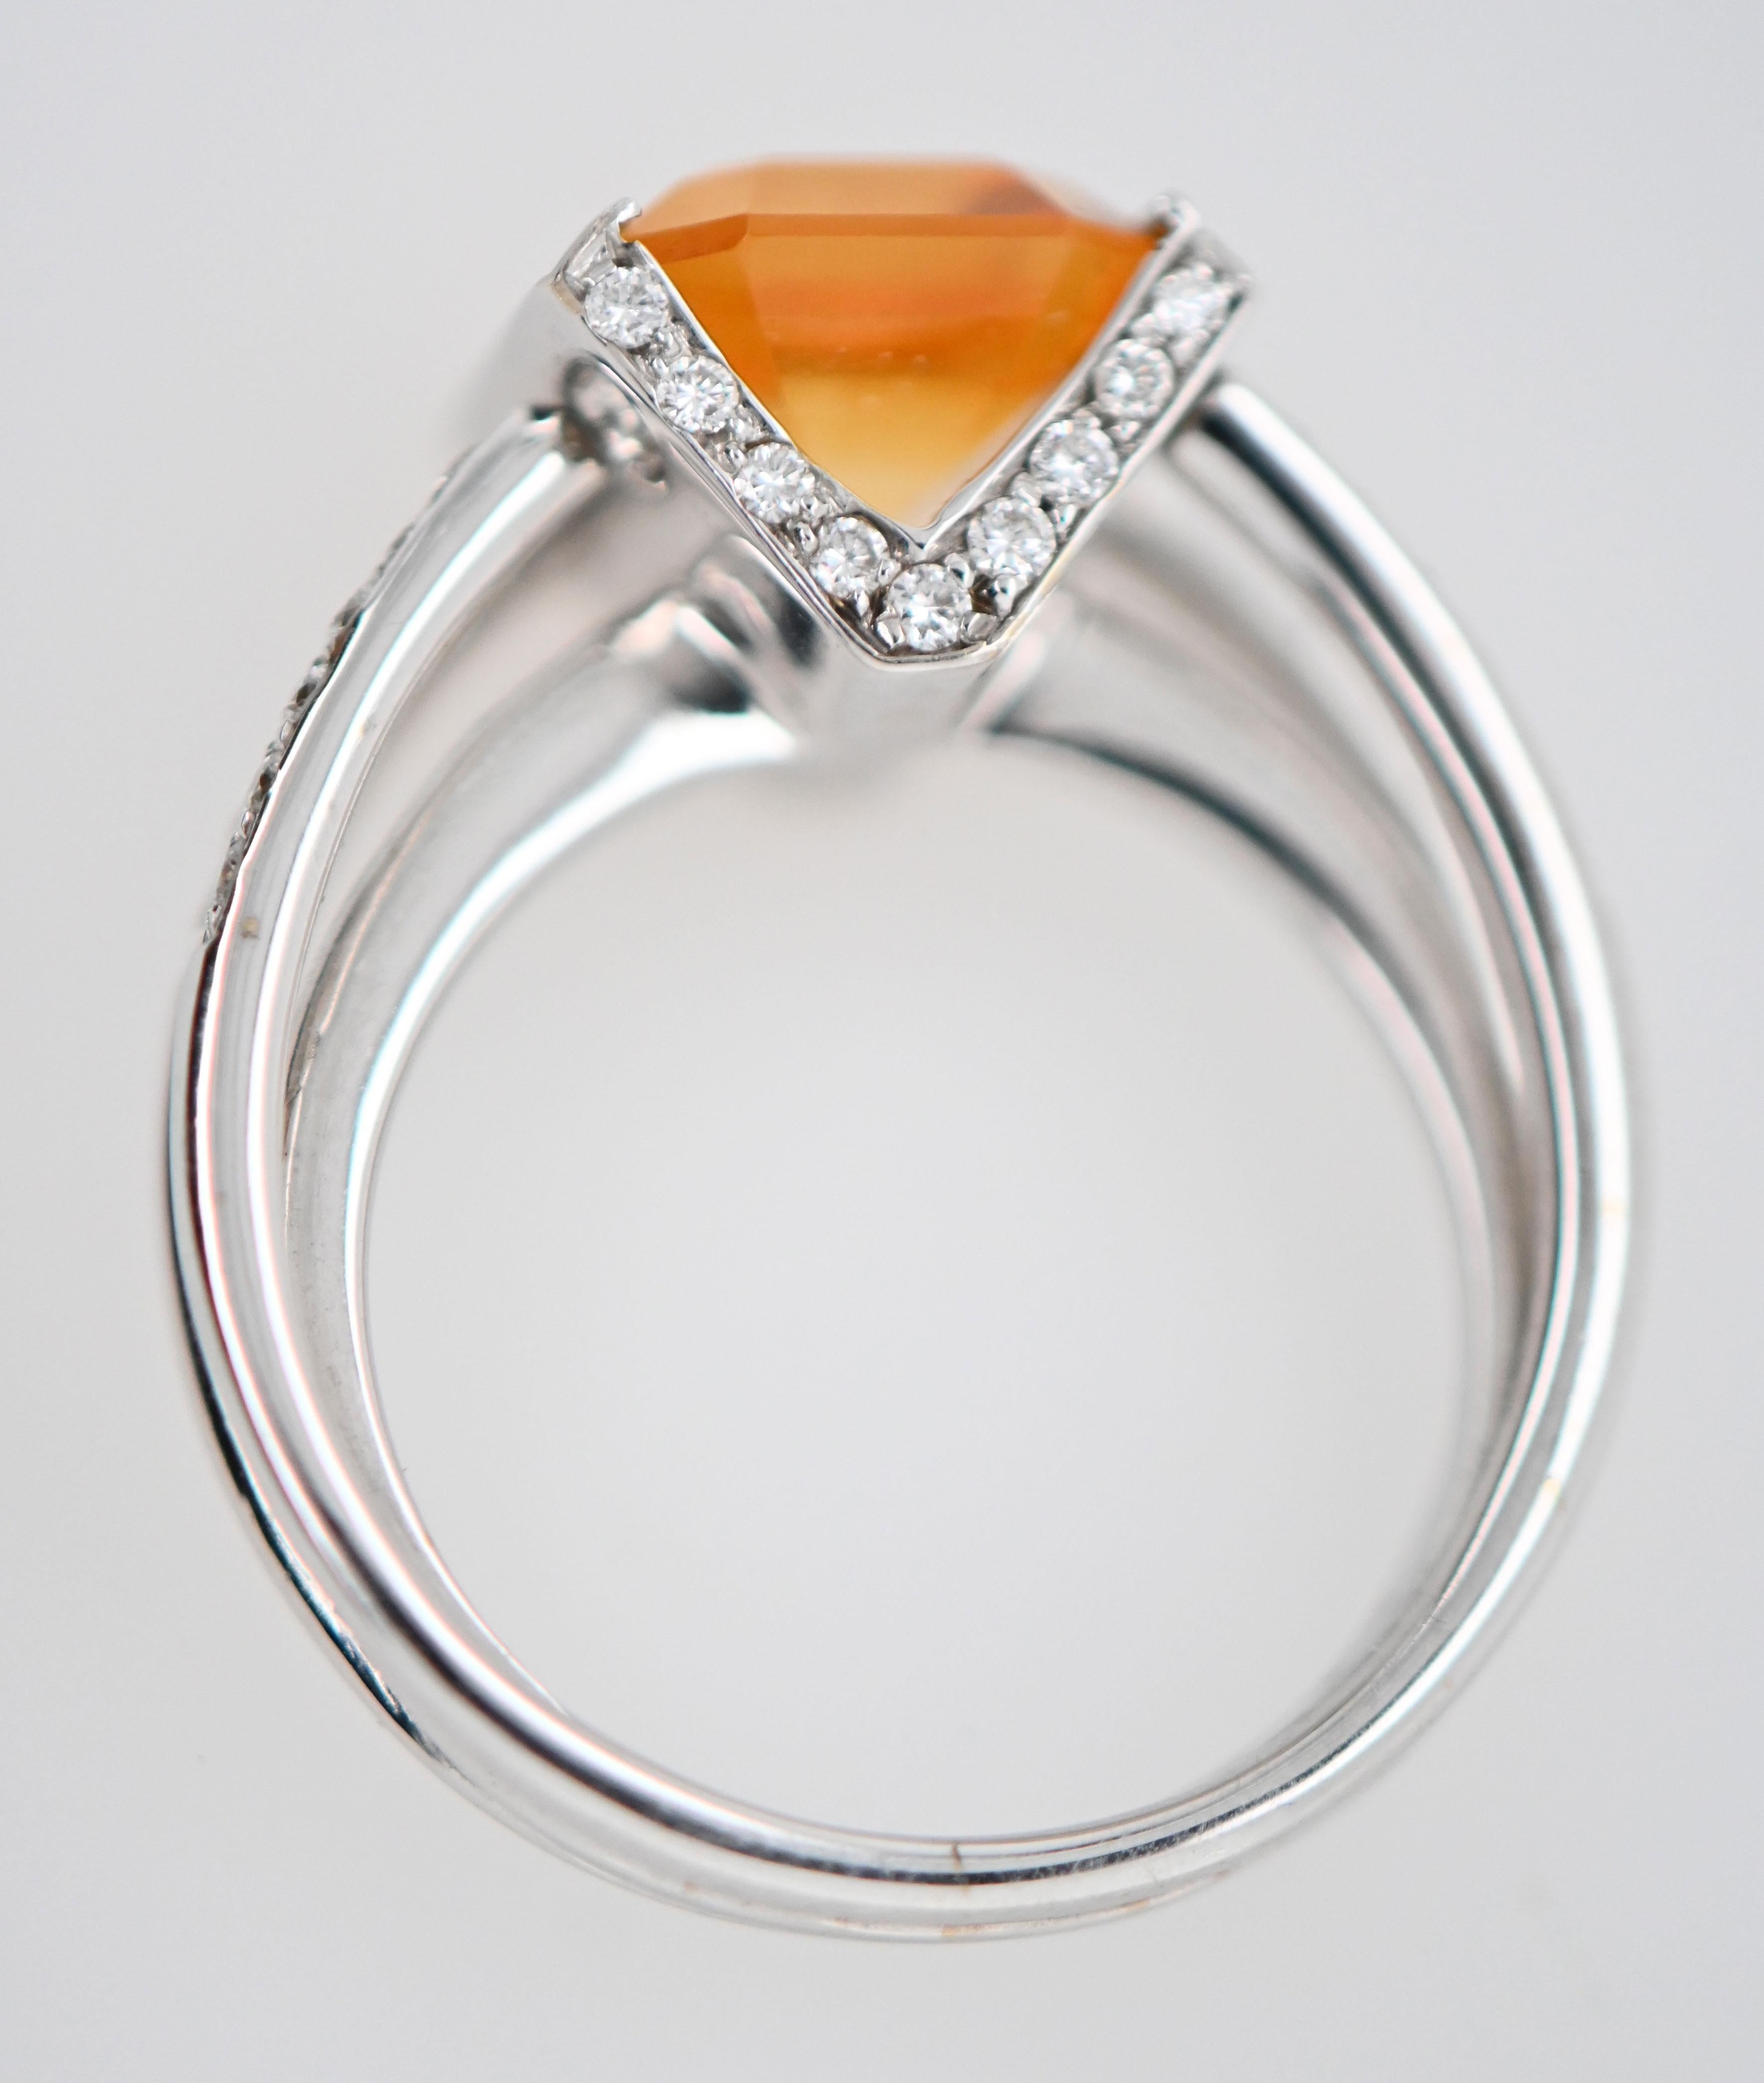 Emerald Shaped Citrine Diamonds Ring White Gold 18 Karat  In New Condition For Sale In Vannes, FR